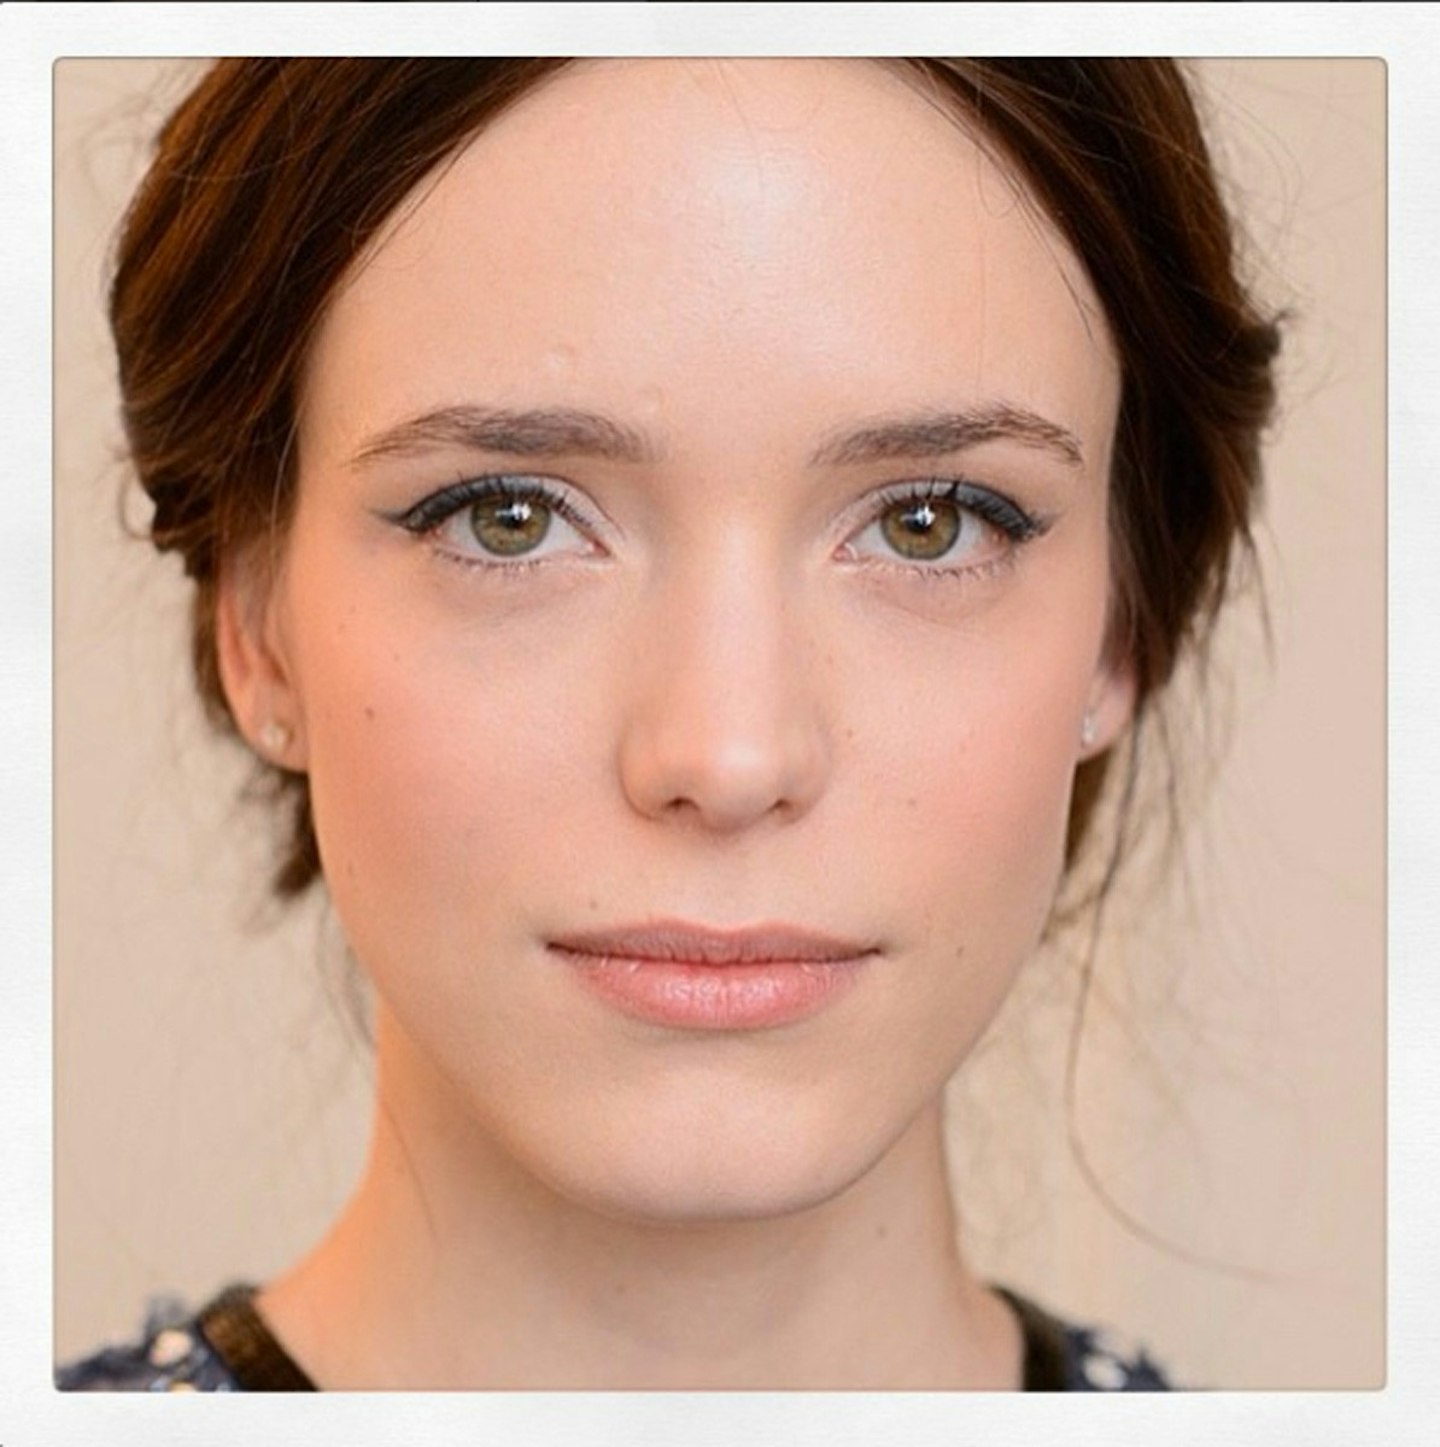 Stacy Martin's makeup by Lancome [Instagram]